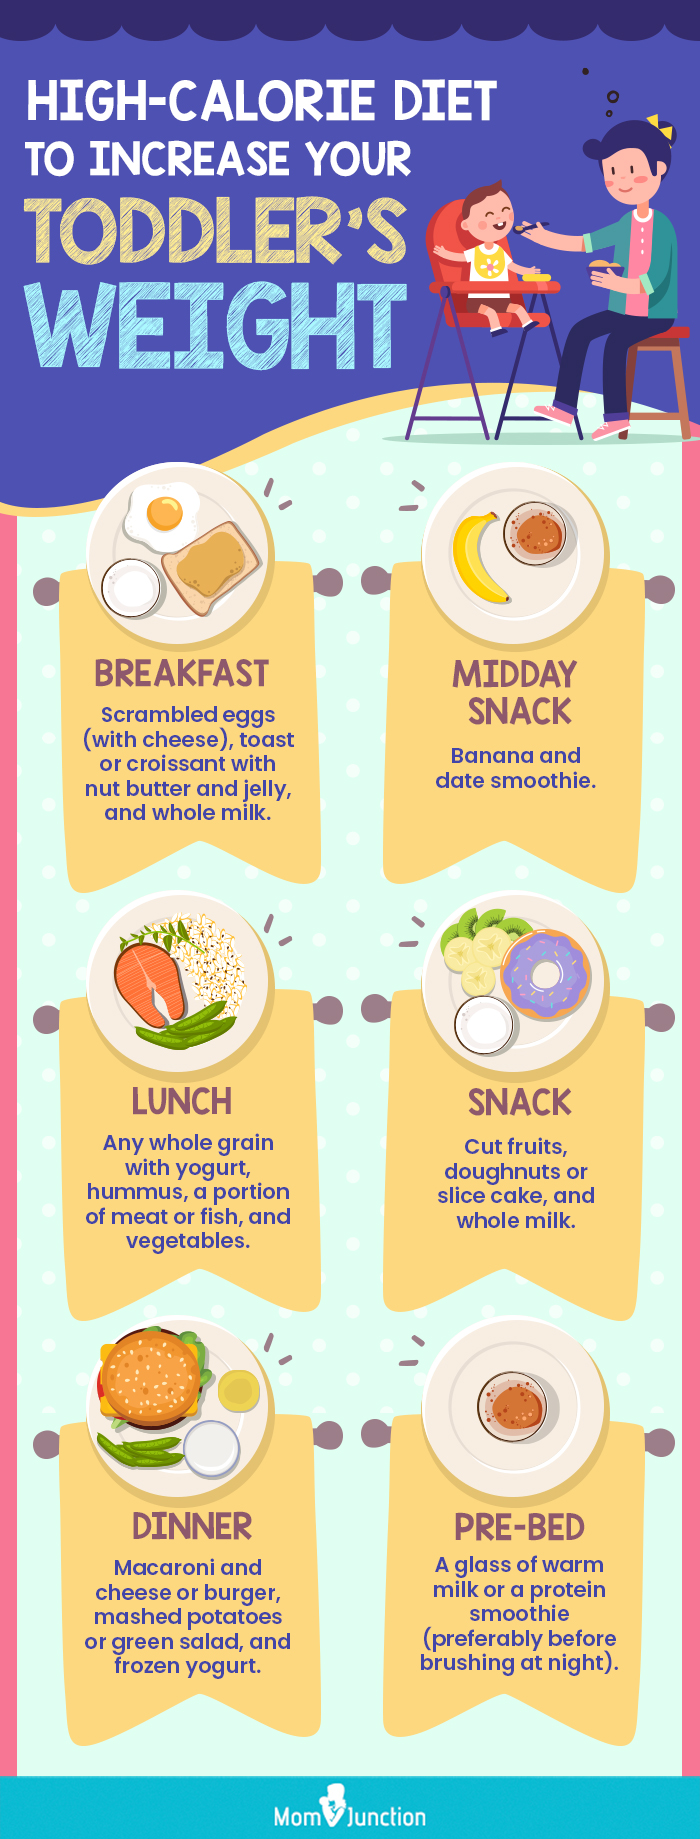 Feeding & Nutrition Tips: 4-to 5-Year-Olds 